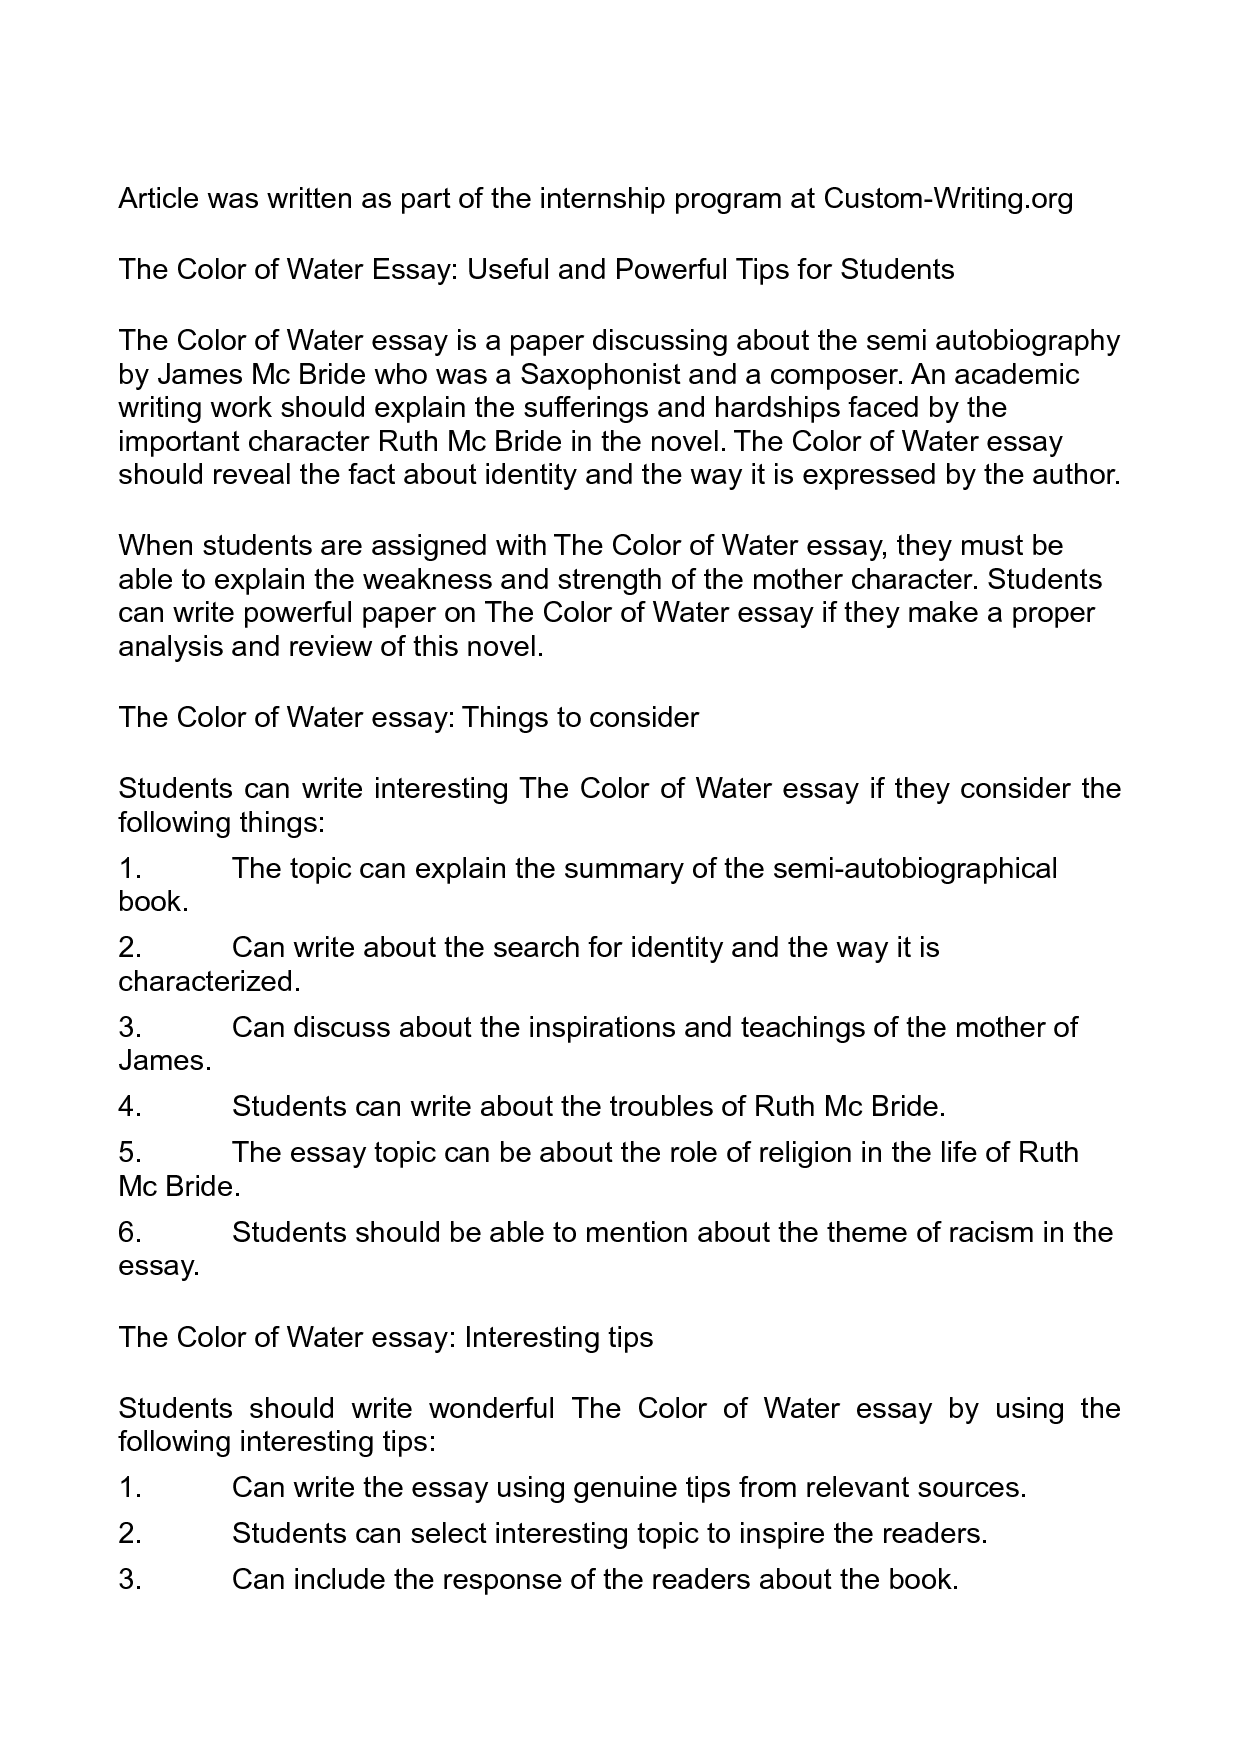 The color of water essay prompts